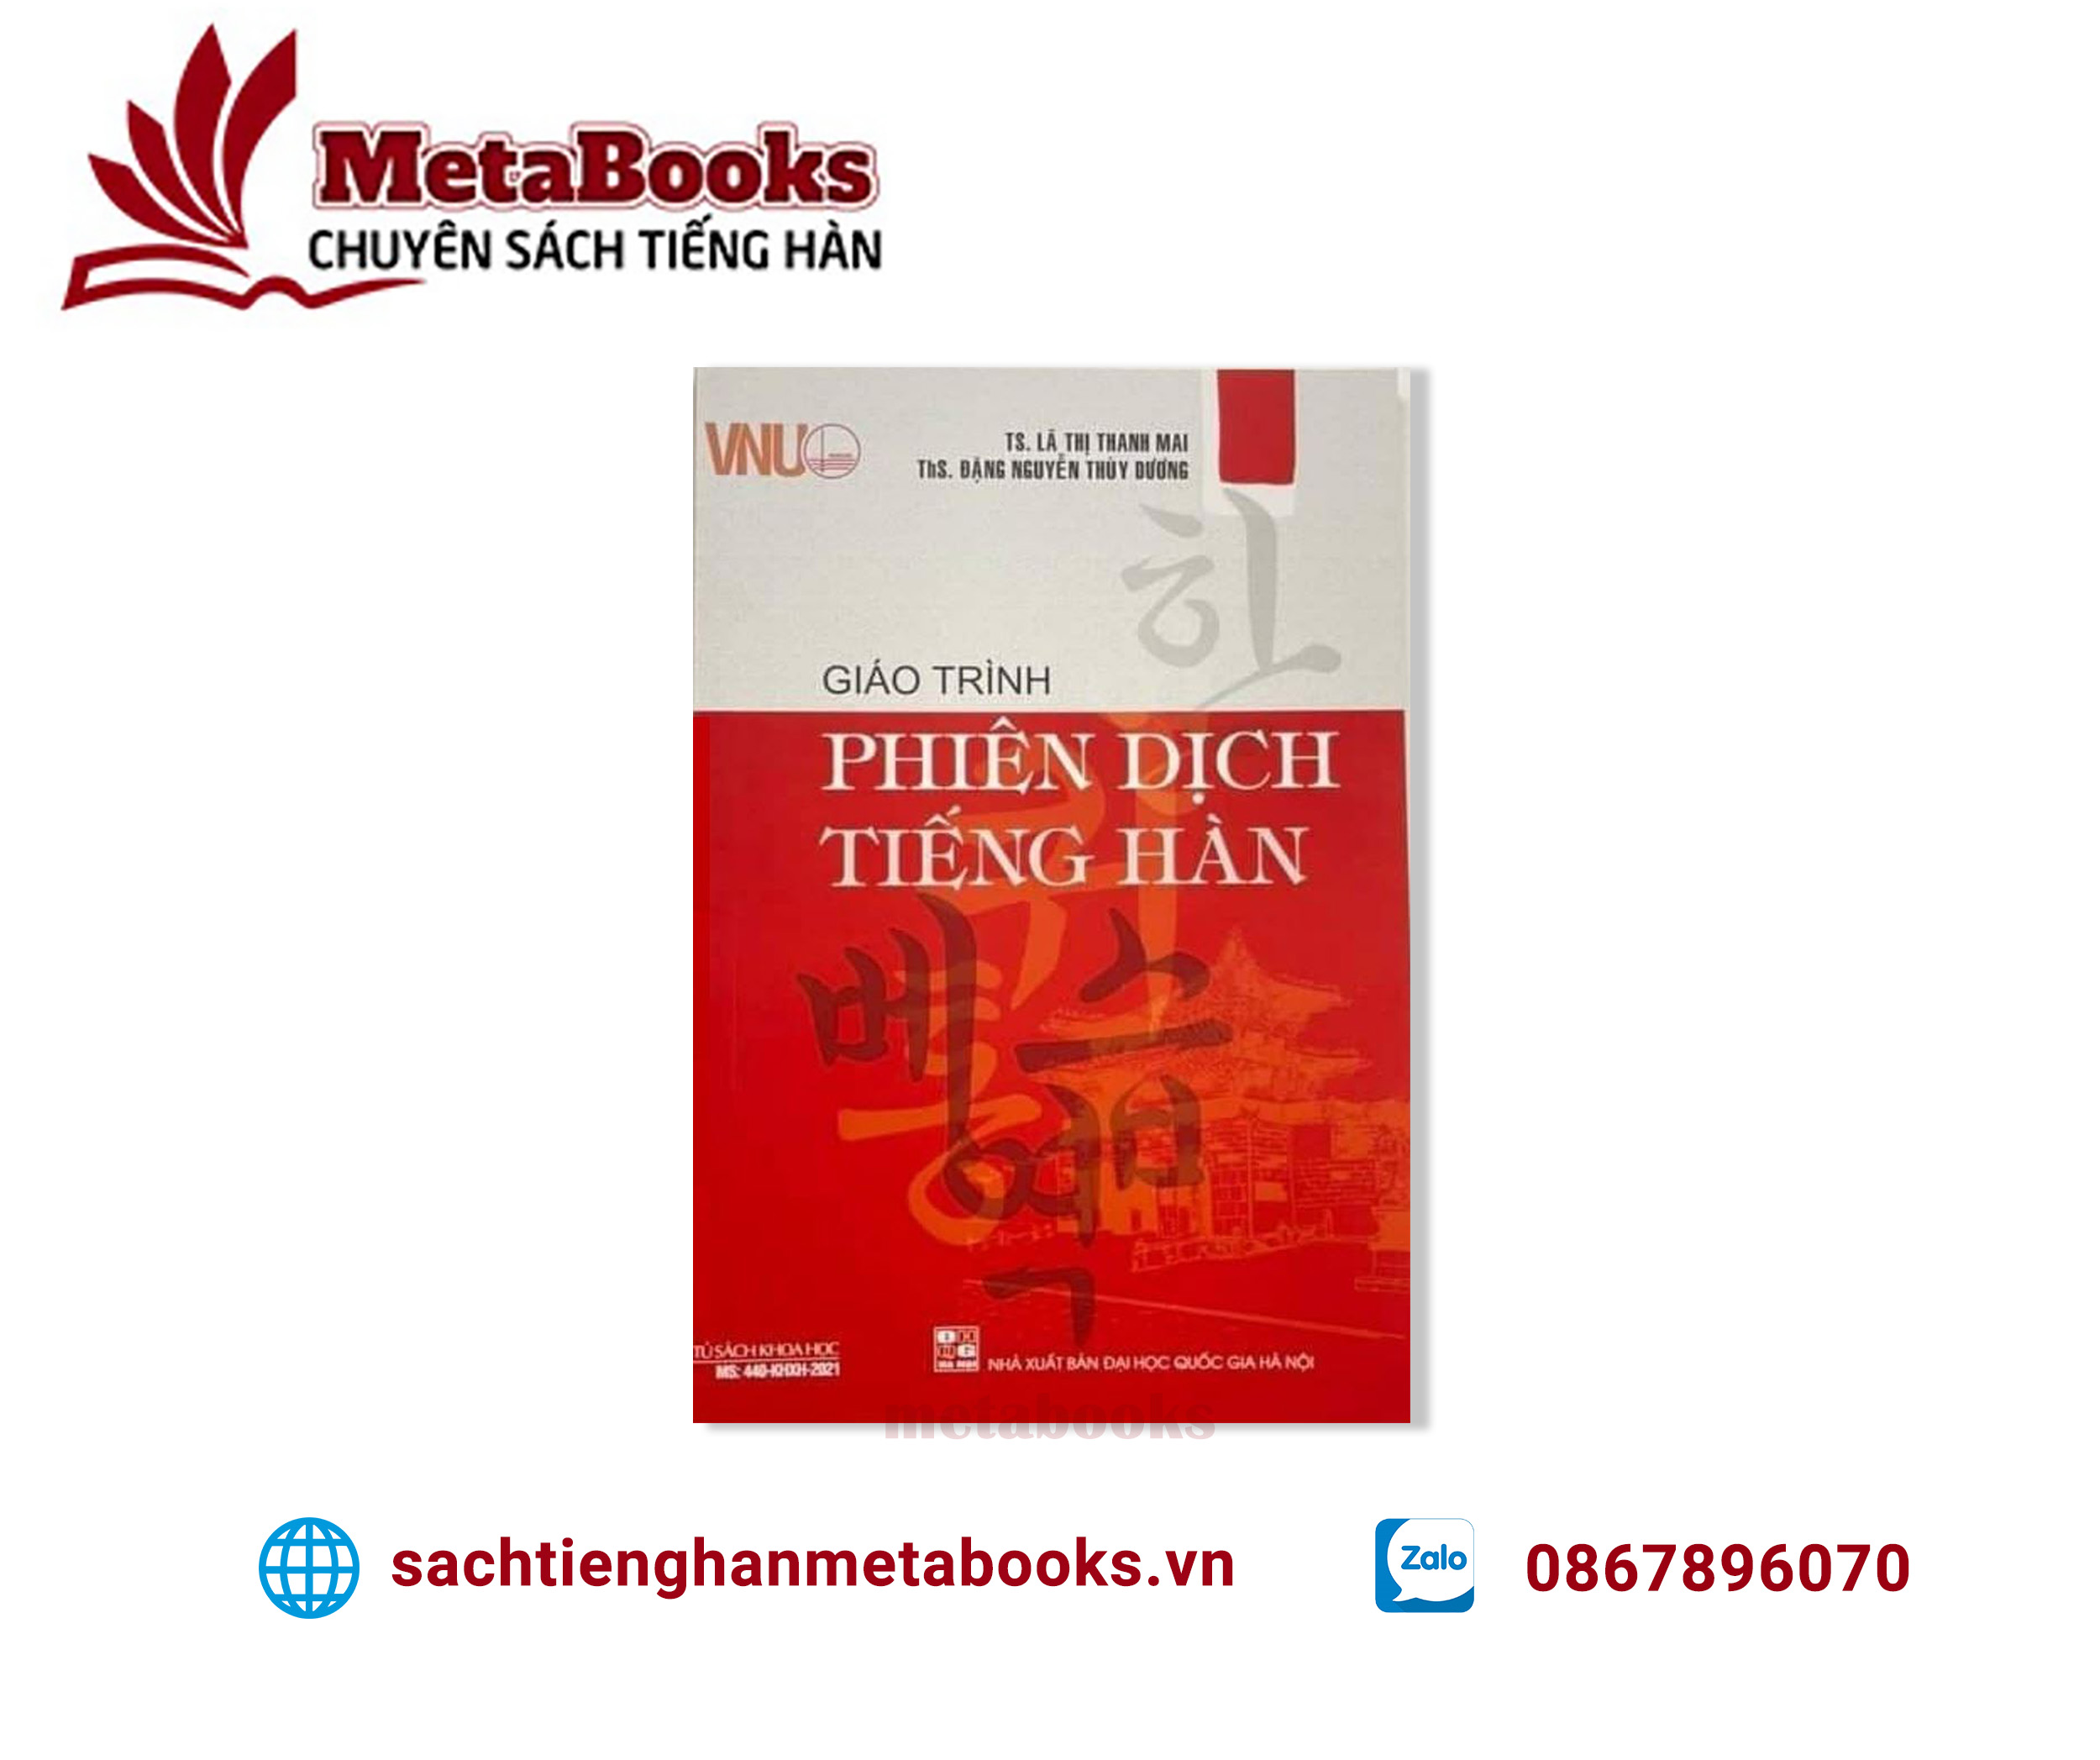 giao-trinh-phien-dich-tieng-han